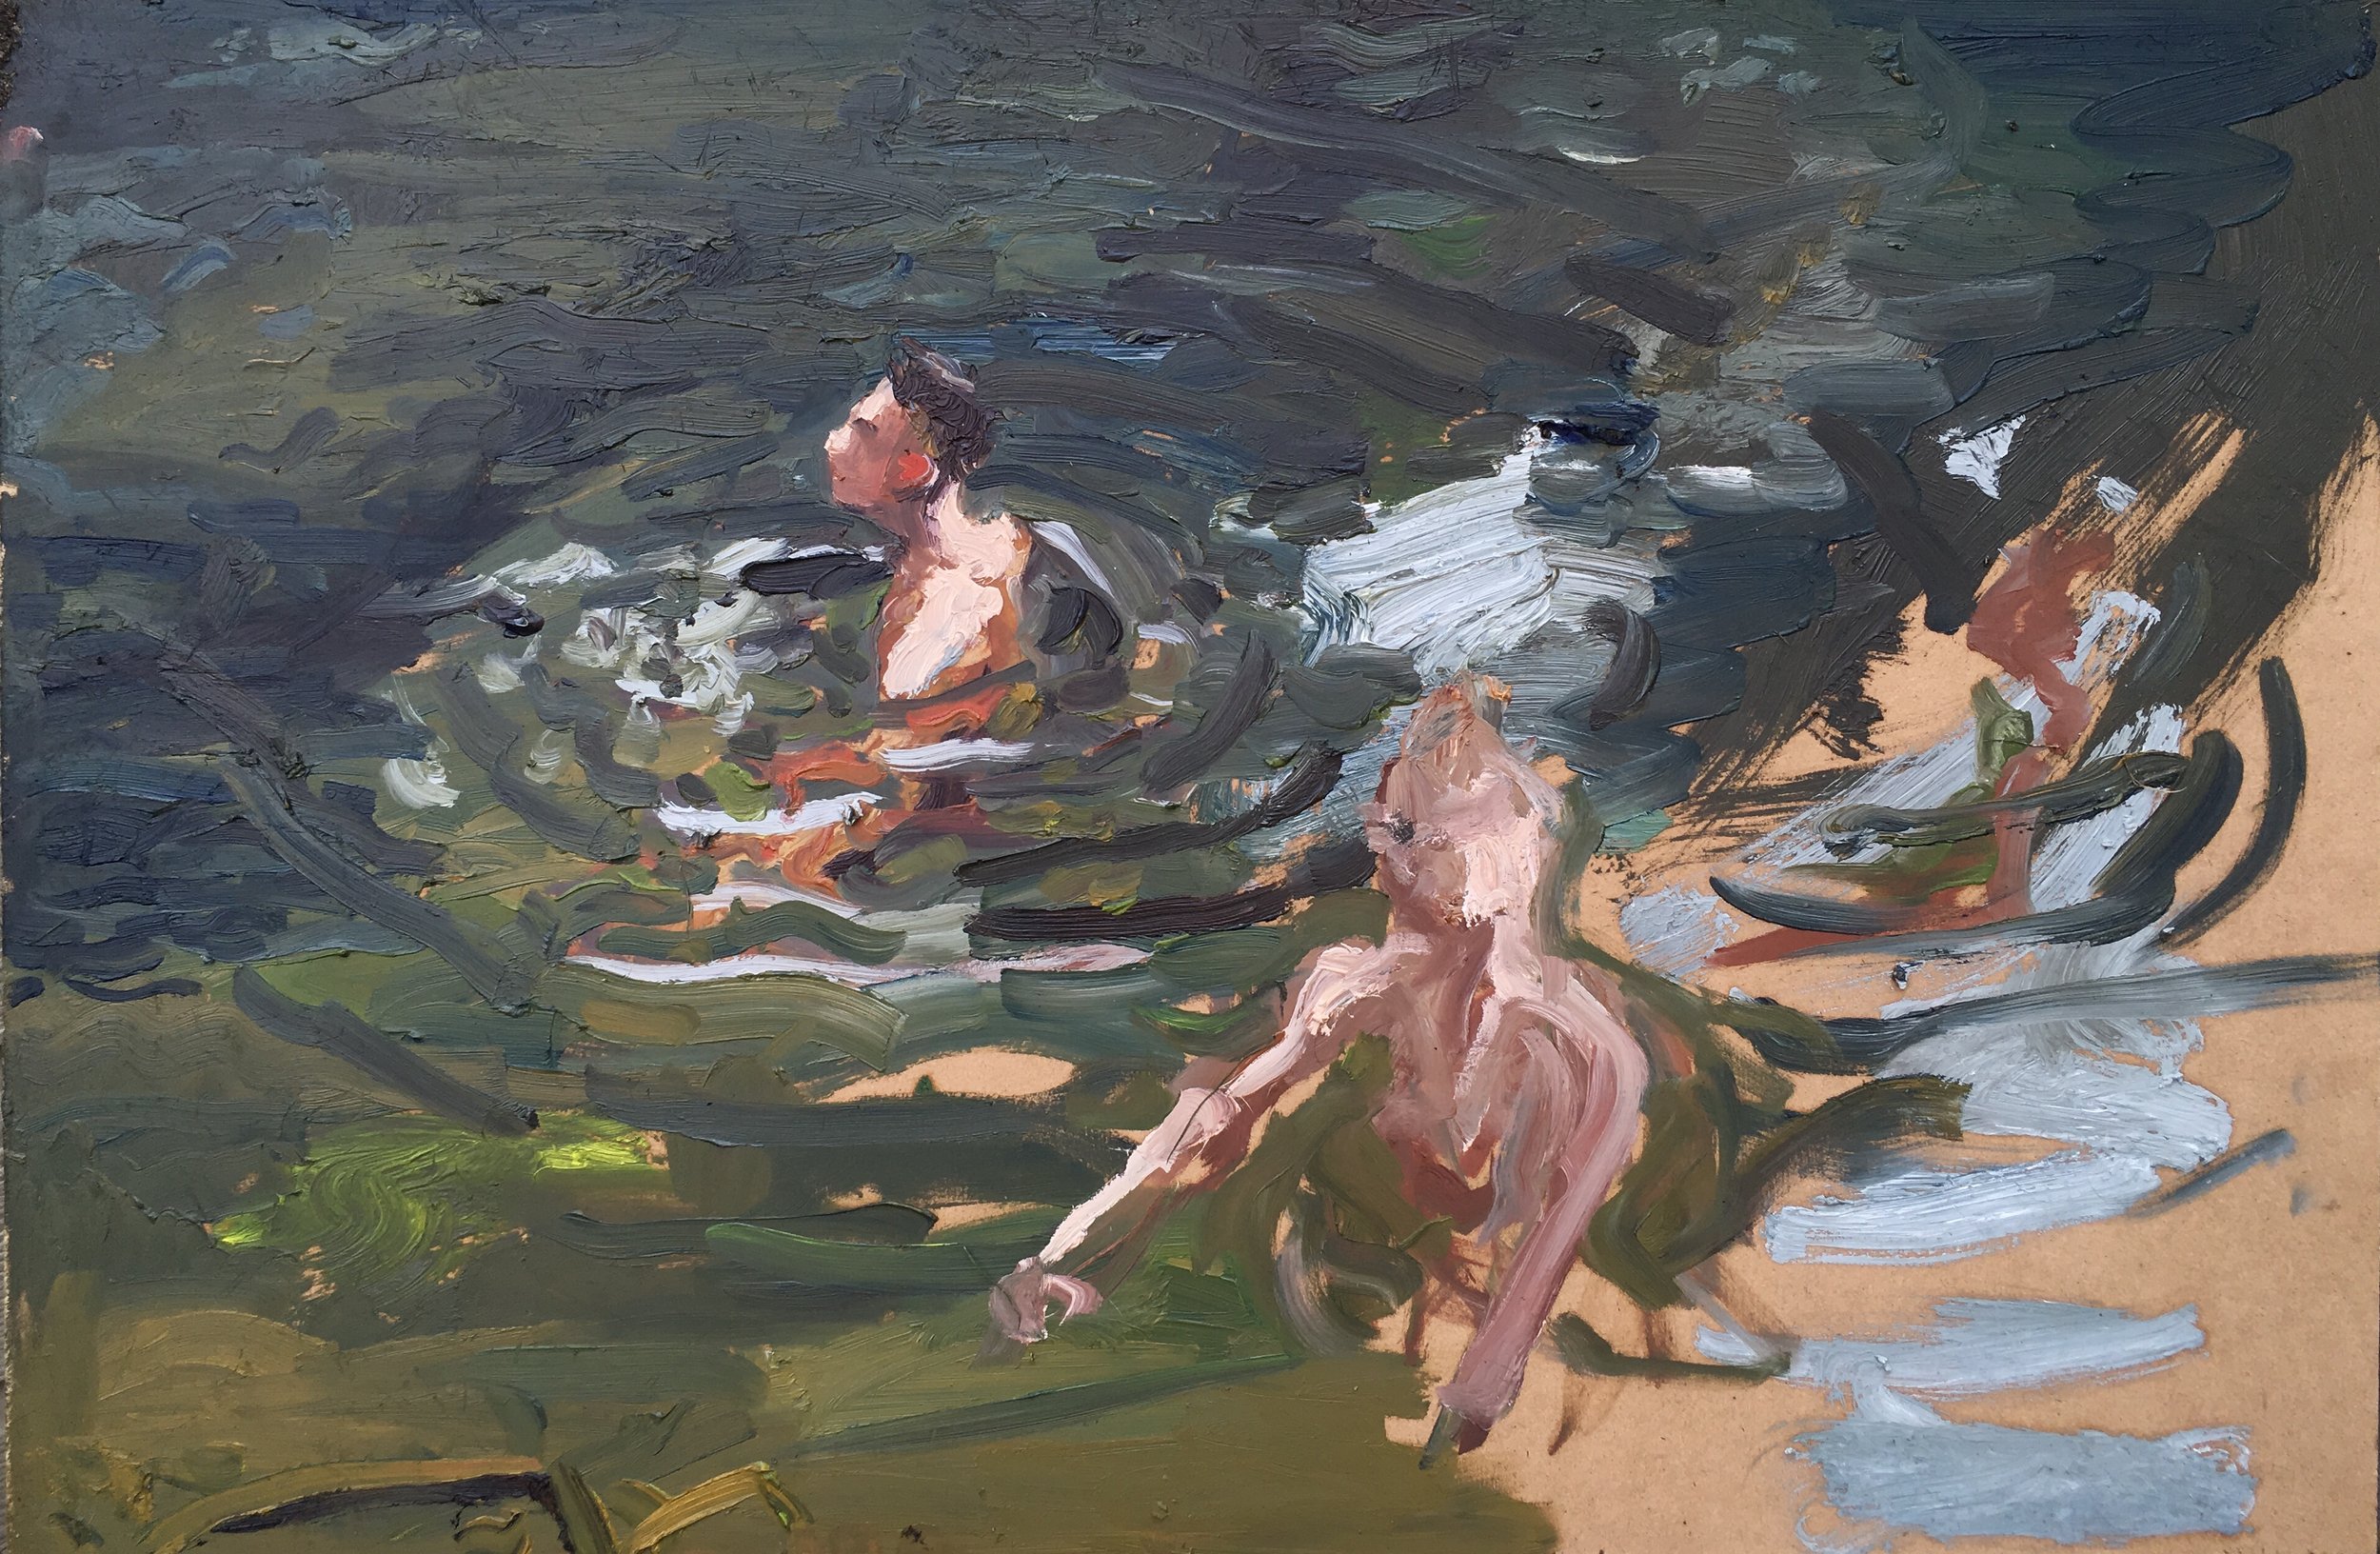 Swimmers in the River 2018